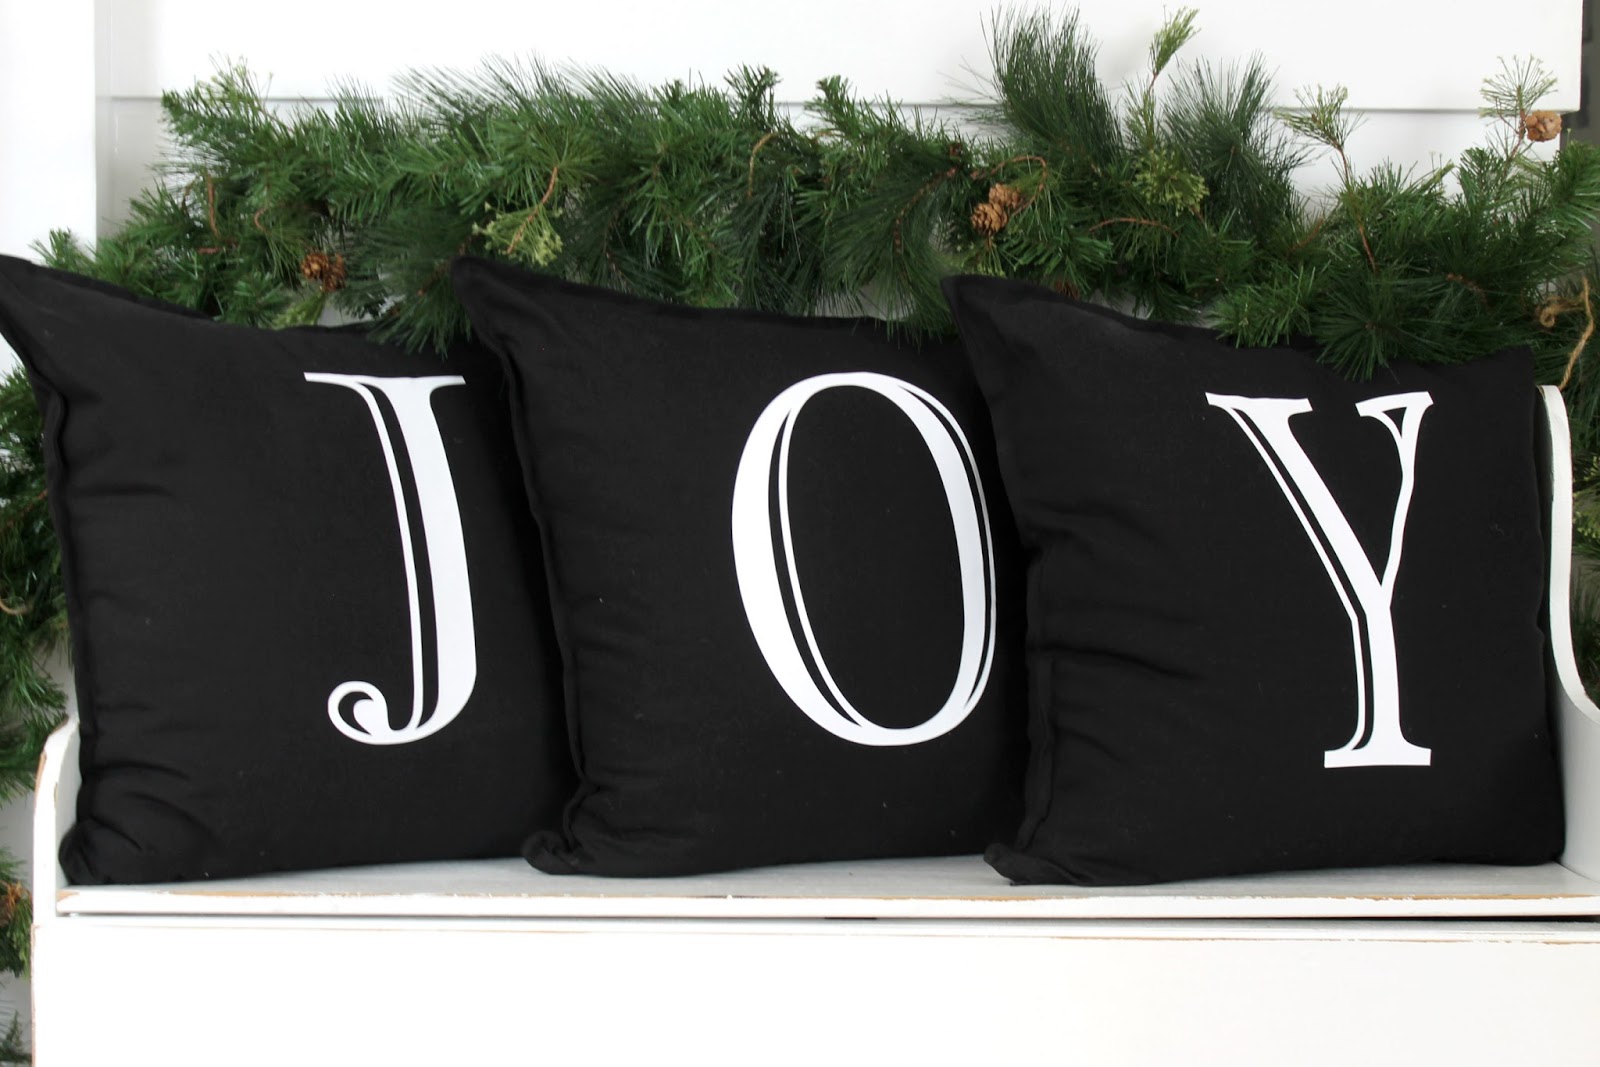 Bring a little JOY to your Christmas decorating! Cute Pillow Alert!